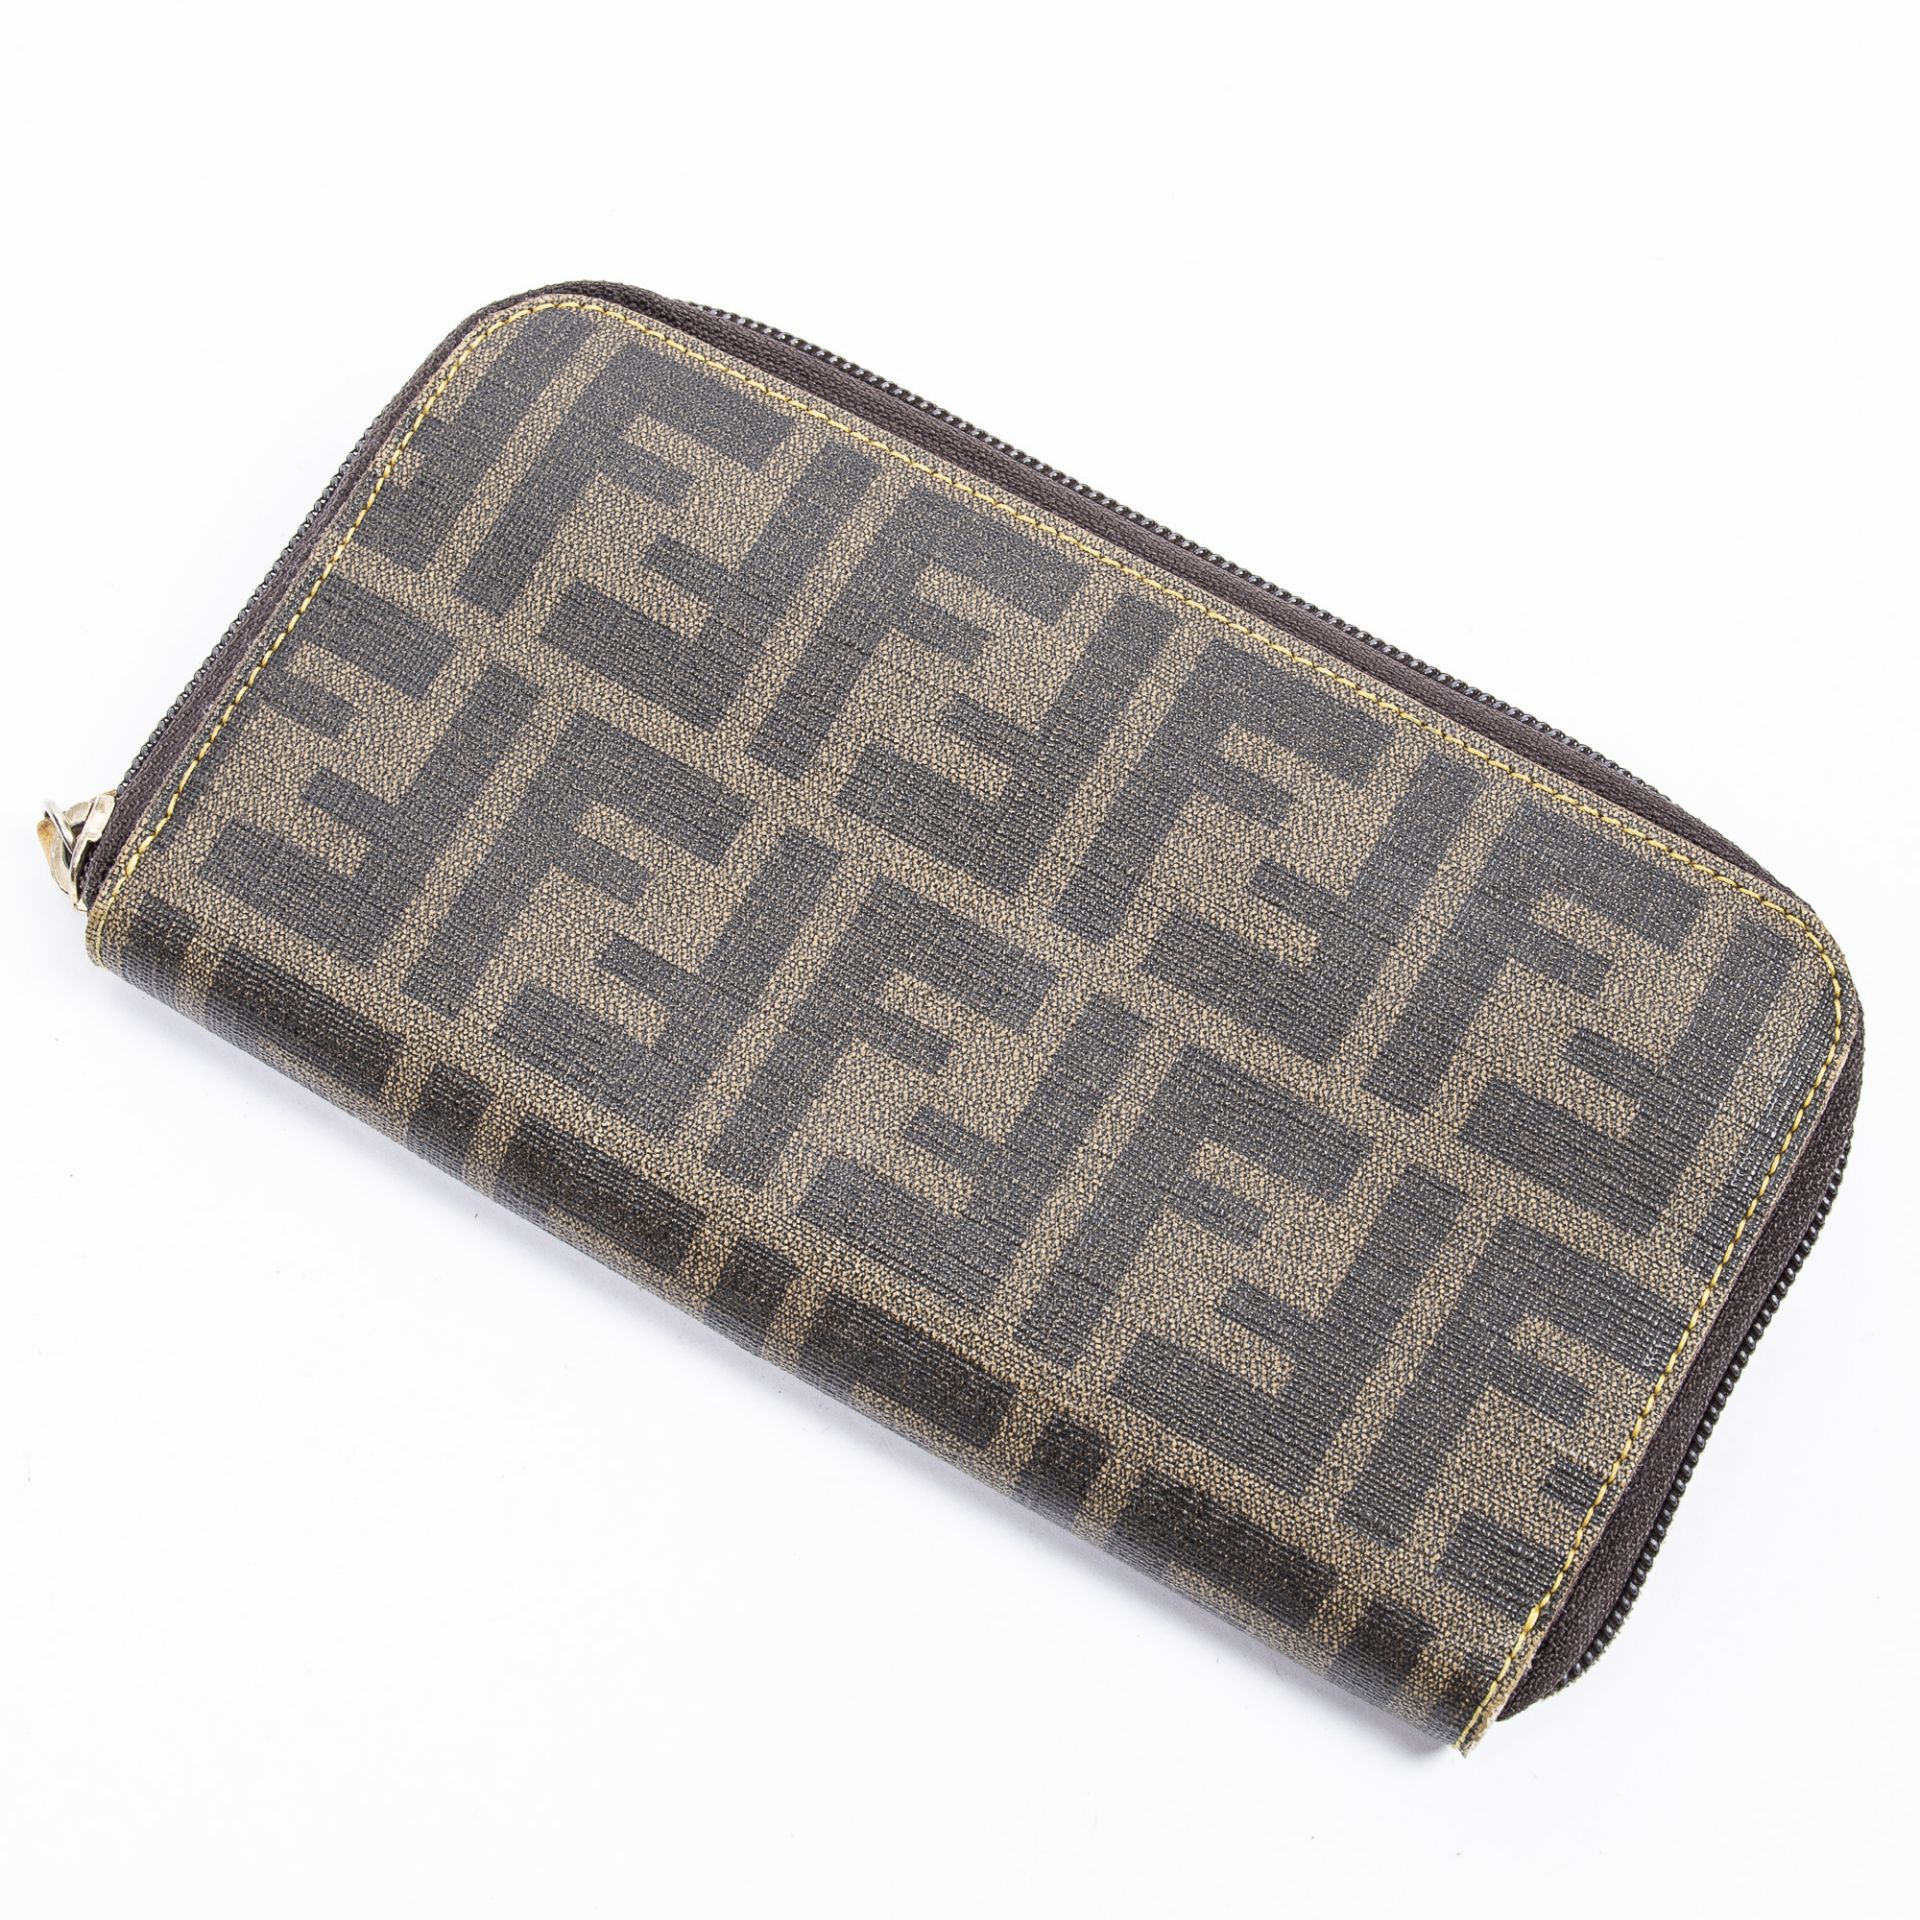 RRP £750.00 Lot To Contain 1 Fendi Coated Canvas Zip Around Wallet In Black/Khaki - 20*11*2cm - AB - - Image 2 of 4